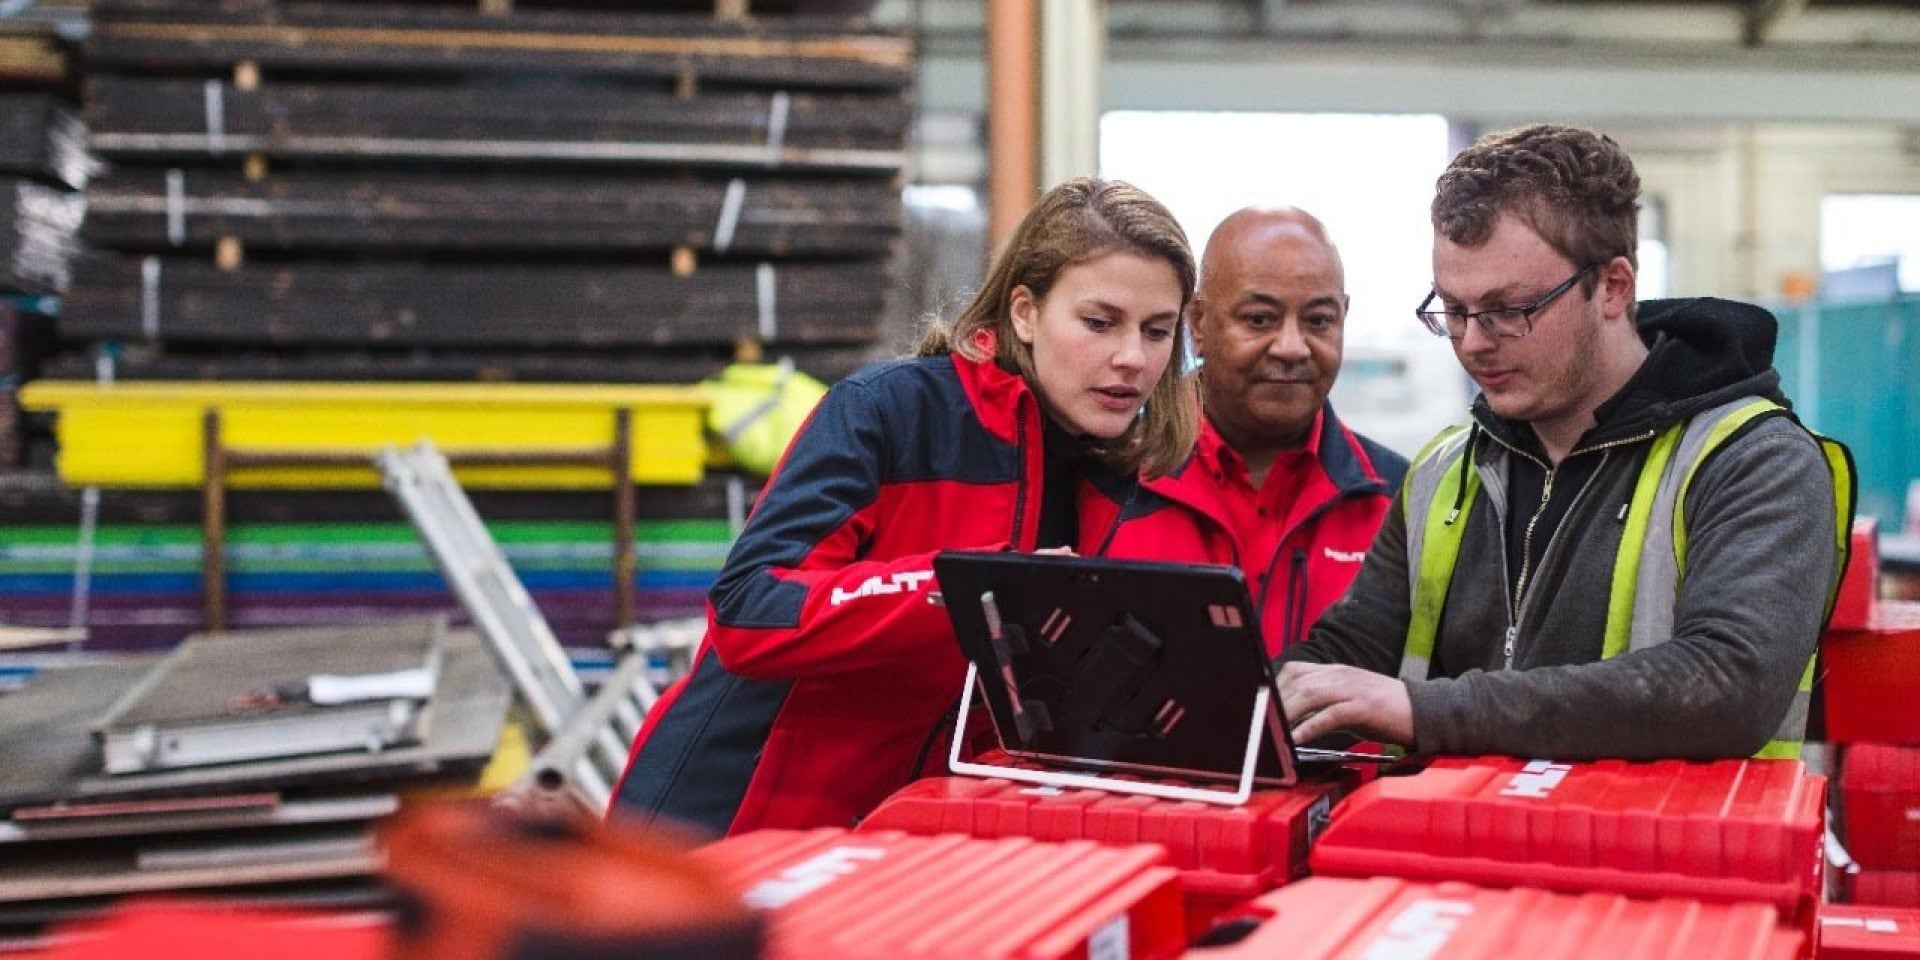 Hilti code of conduct for employees